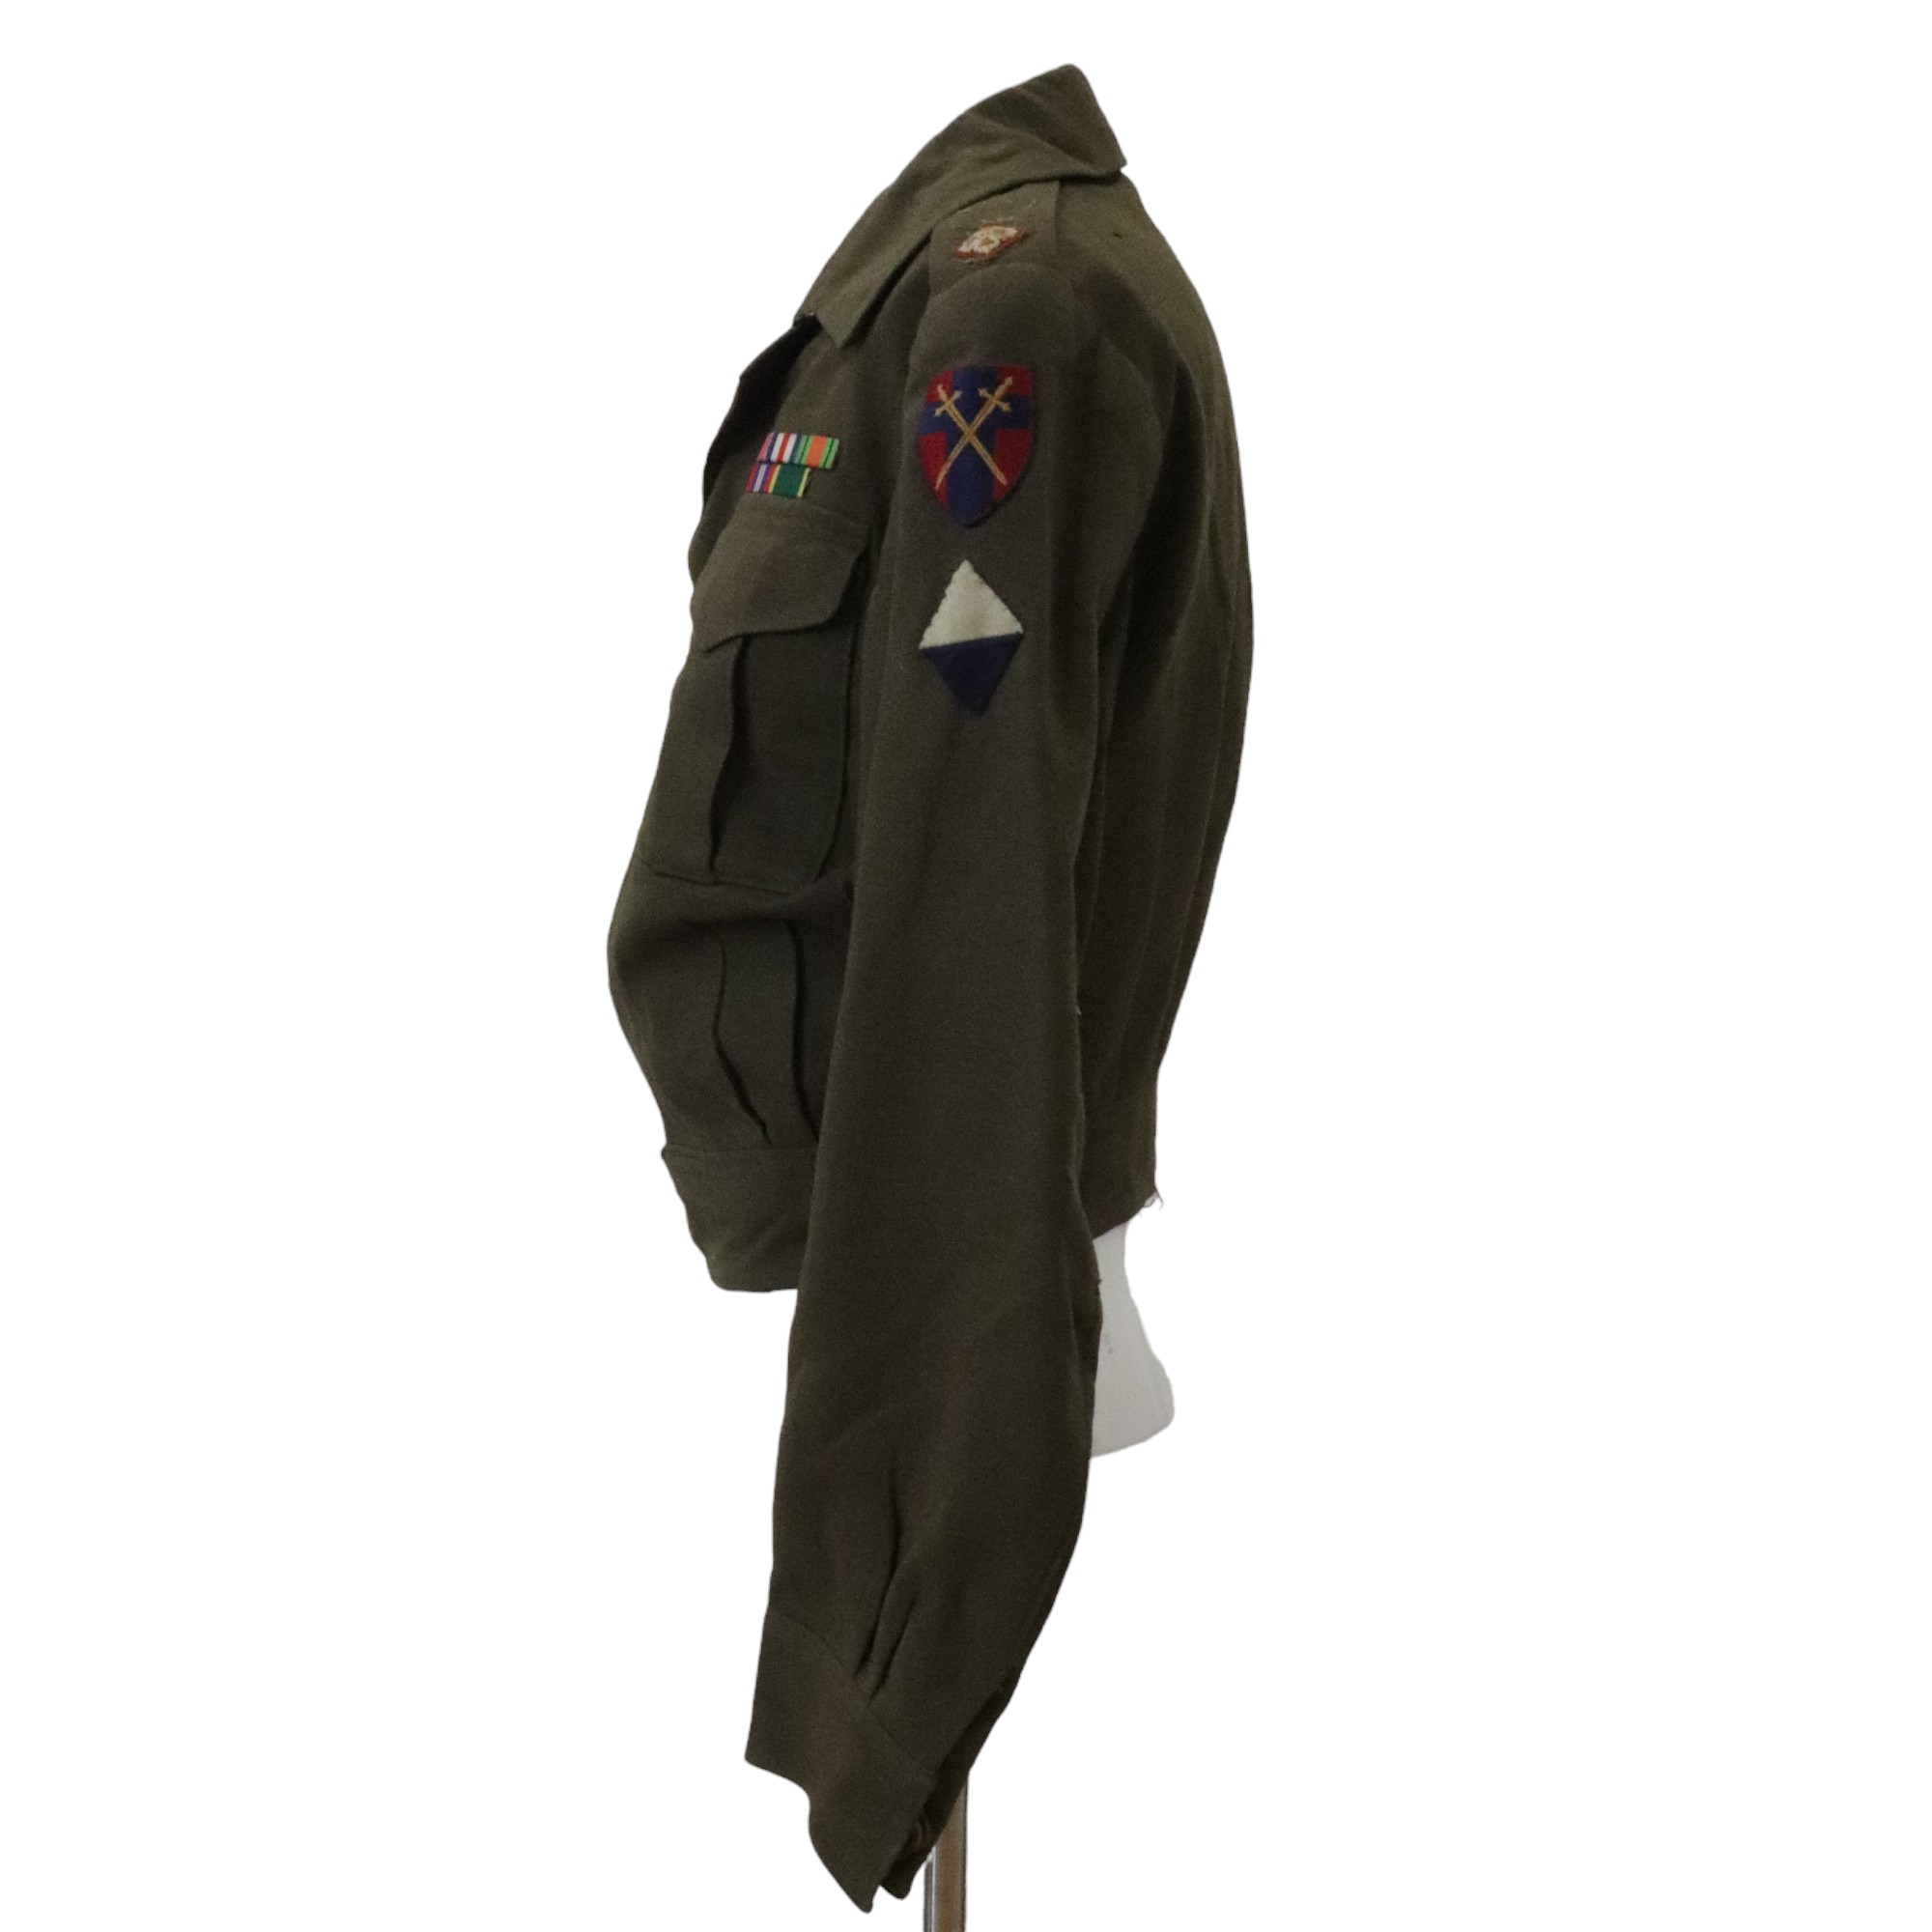 A private purchase Battledress Blouse bearing ATS, HQ 21st Army Group insignia - Image 4 of 6